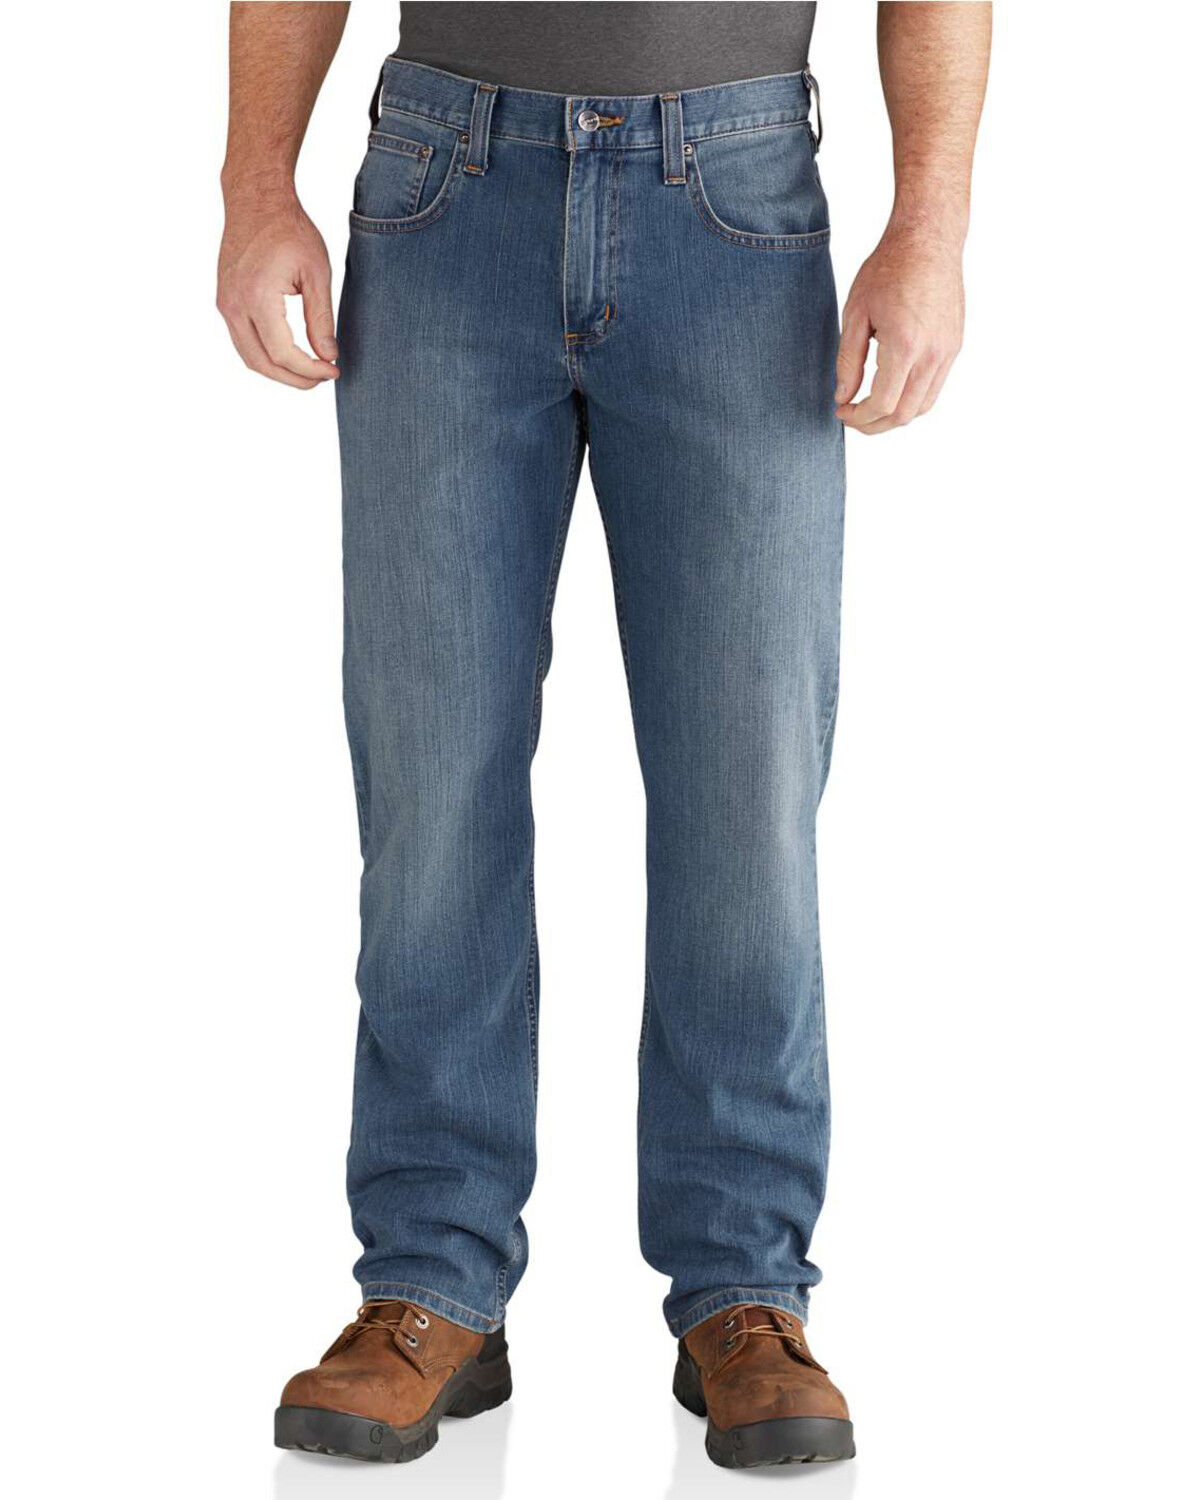 blue rugged jeans